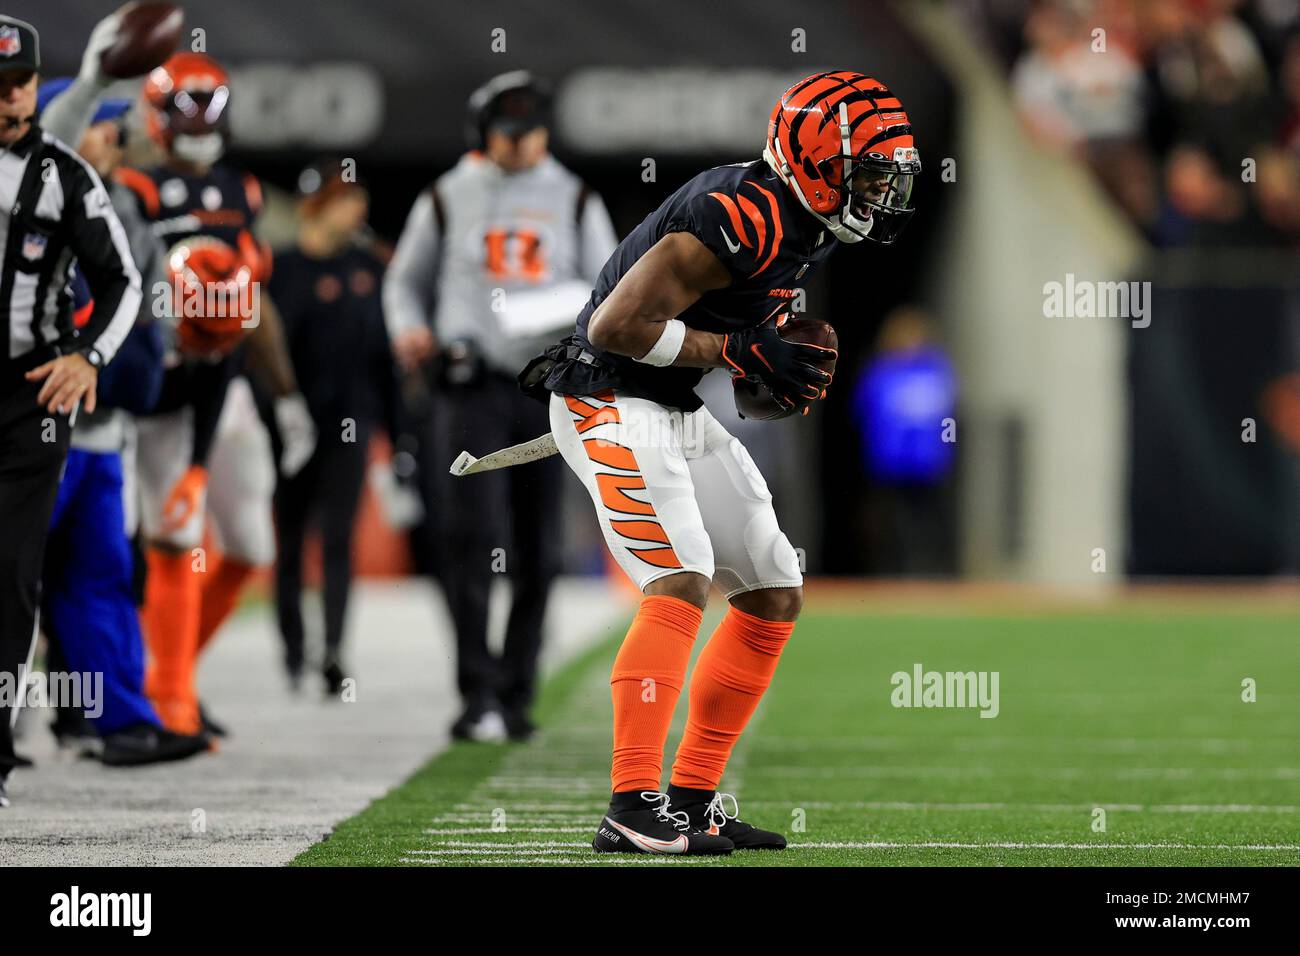 Cincinnati Bengals wide receiver Ja'Marr Chase (1) celebrates after a catch  during an NFL football game against the San Francisco 49ers, Sunday, Dec.  12, 2021, in Cincinnati. San Francisco won 26-23 in